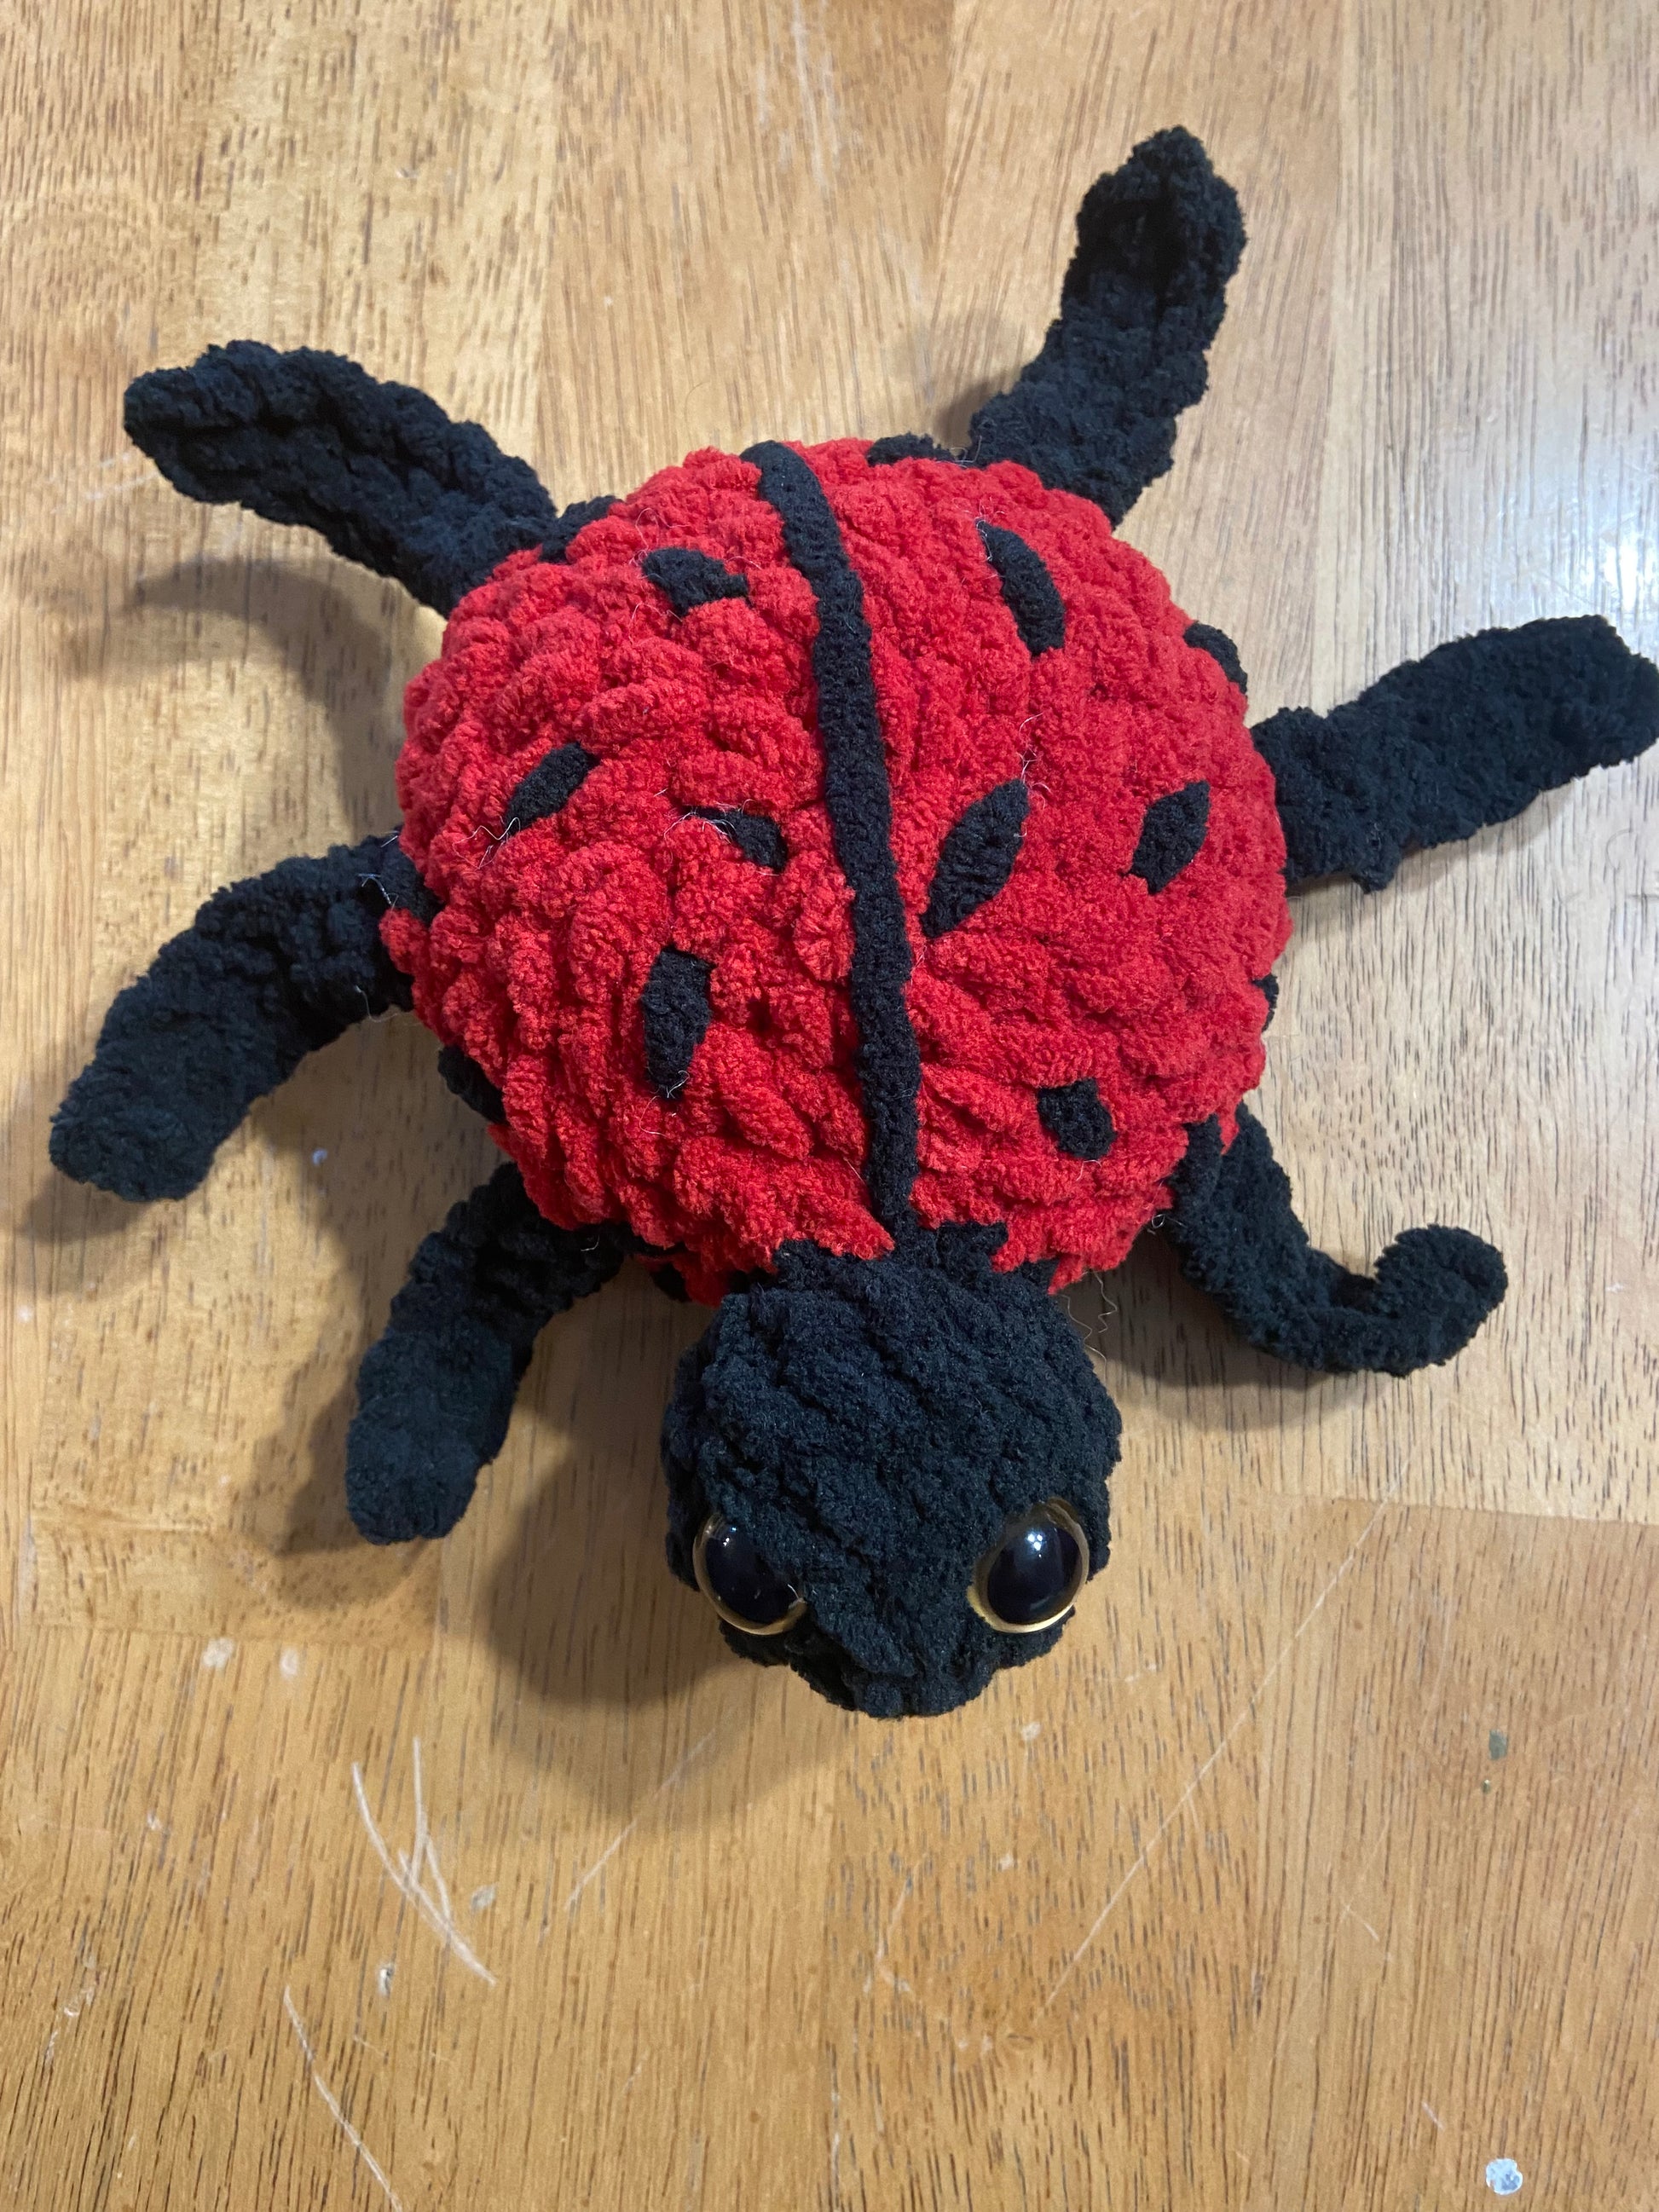 Handmade crochet ladybug plush toy with vibrant red and black colors, adorable design, and huggable texture.